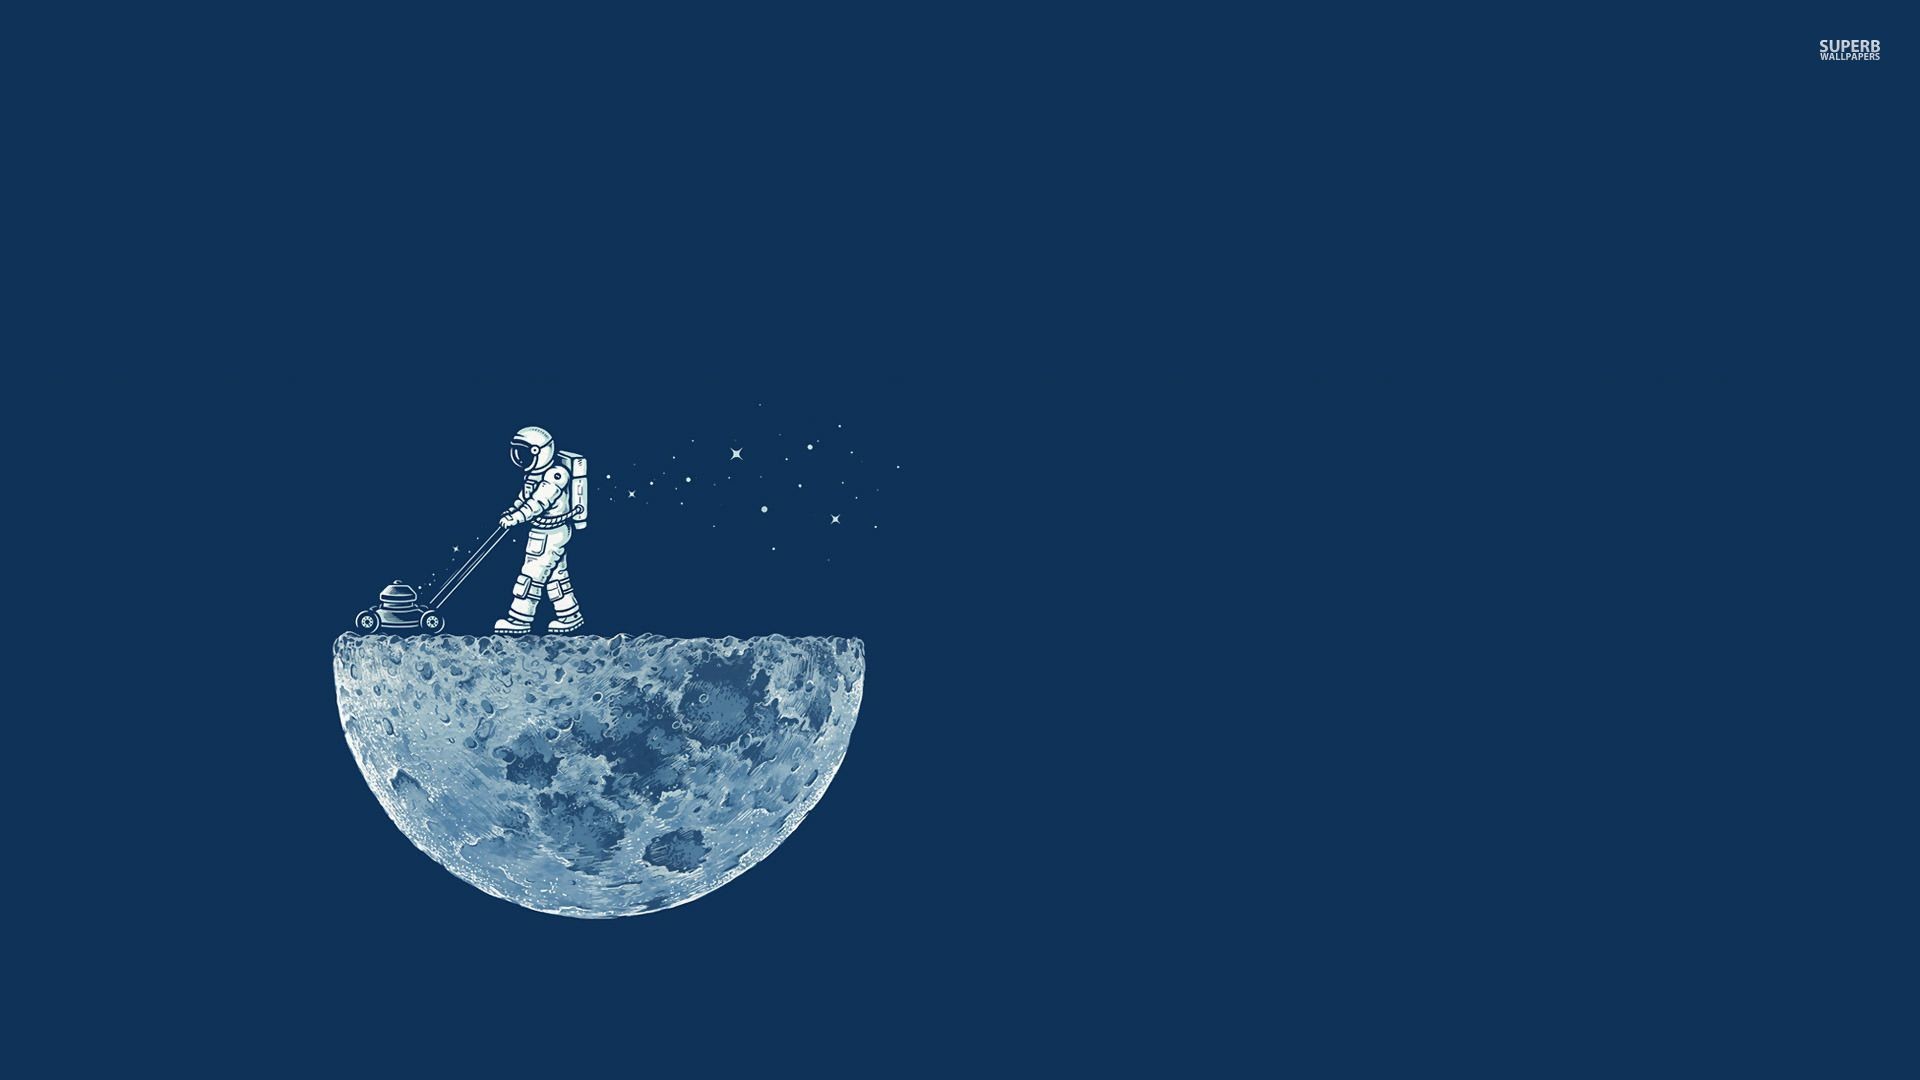 1920x1080 Astronaut mowing the moon wallpaper - Funny wallpapers - #31038